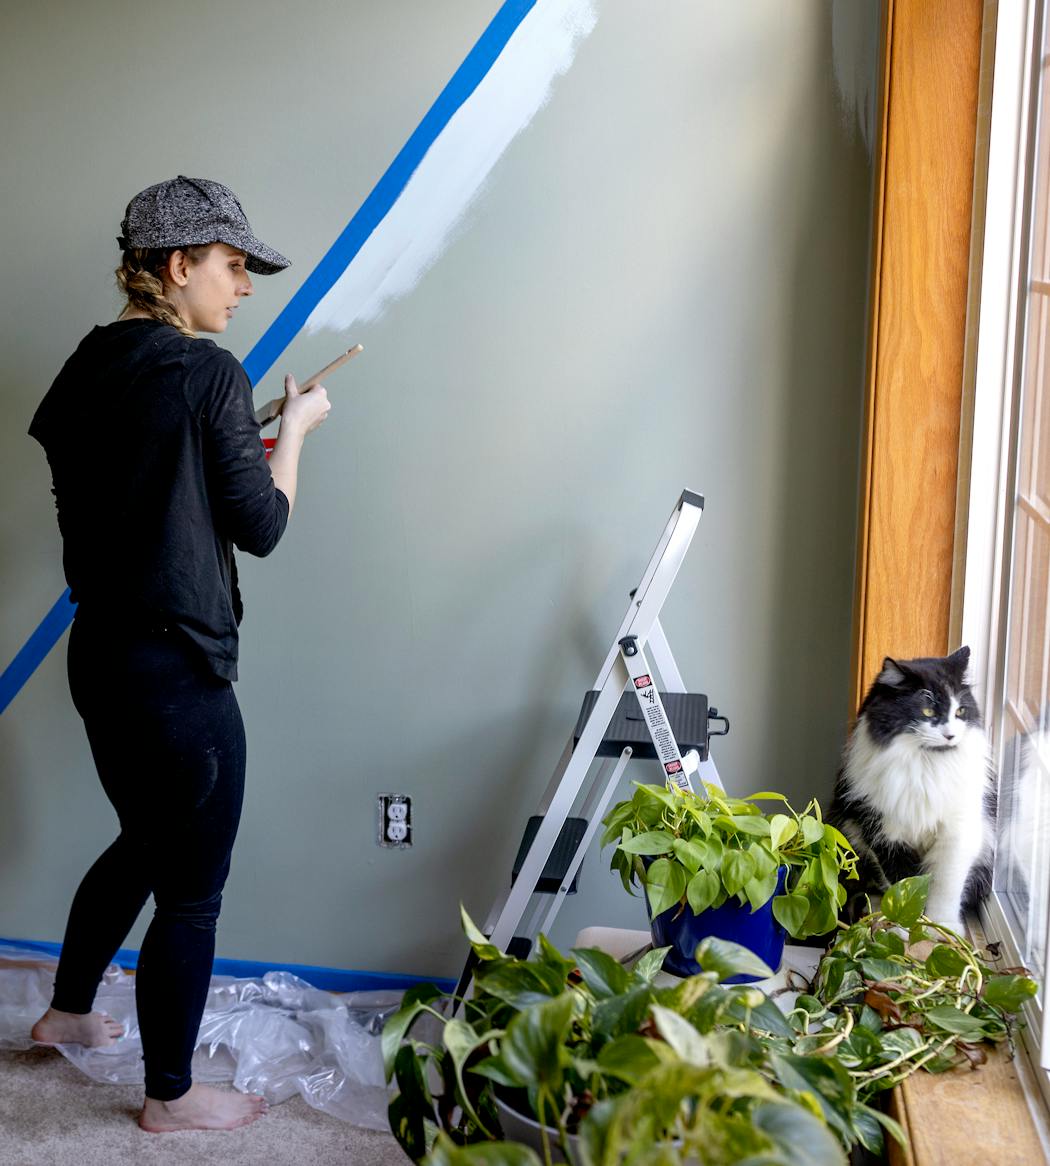 Kat Dodge painted alongside her cat Tony Bennett in her new home in Inver Grove Heights.